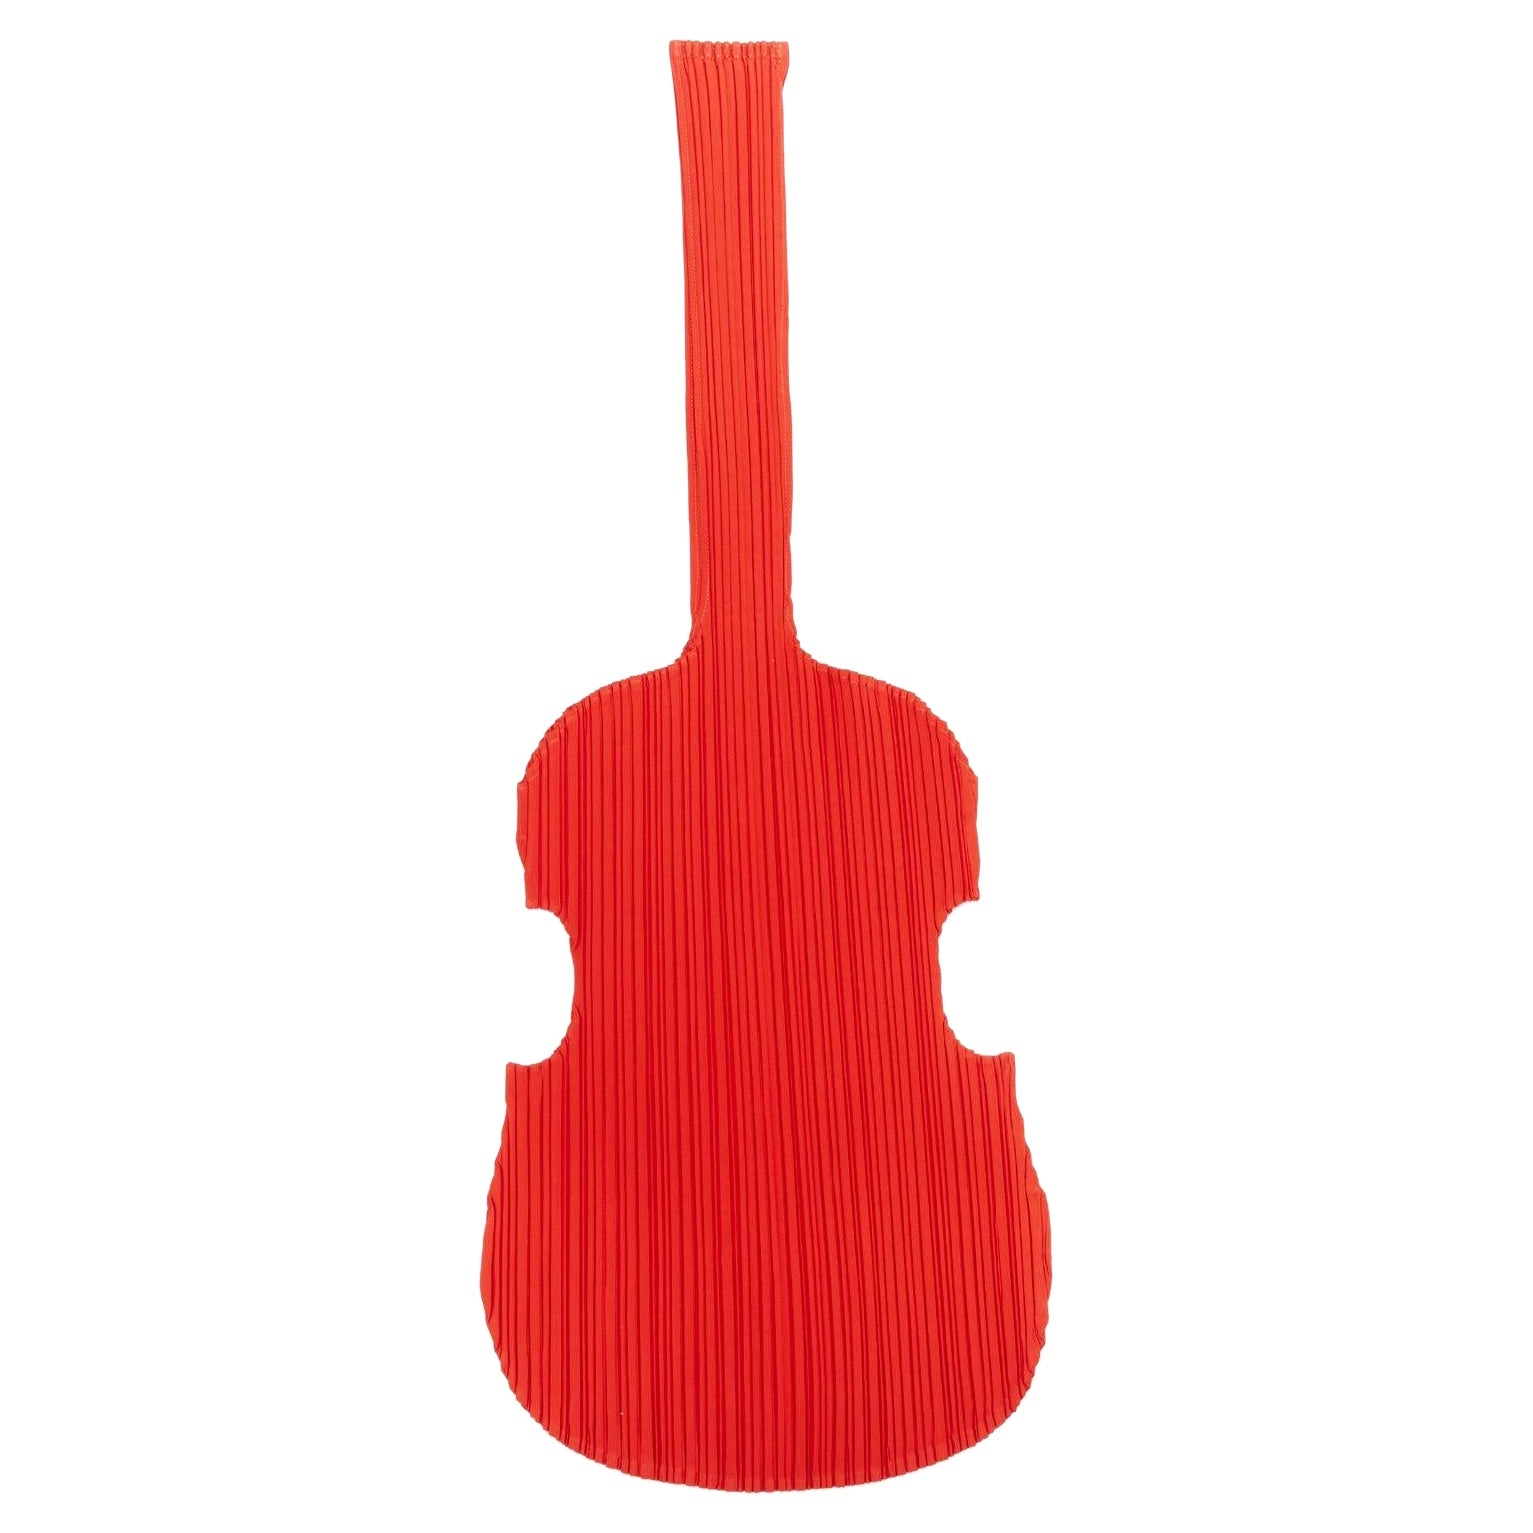 ISSEY MIYAKE PLEATS PLEASE rare limited edition red plisse guitar tote bag For Sale